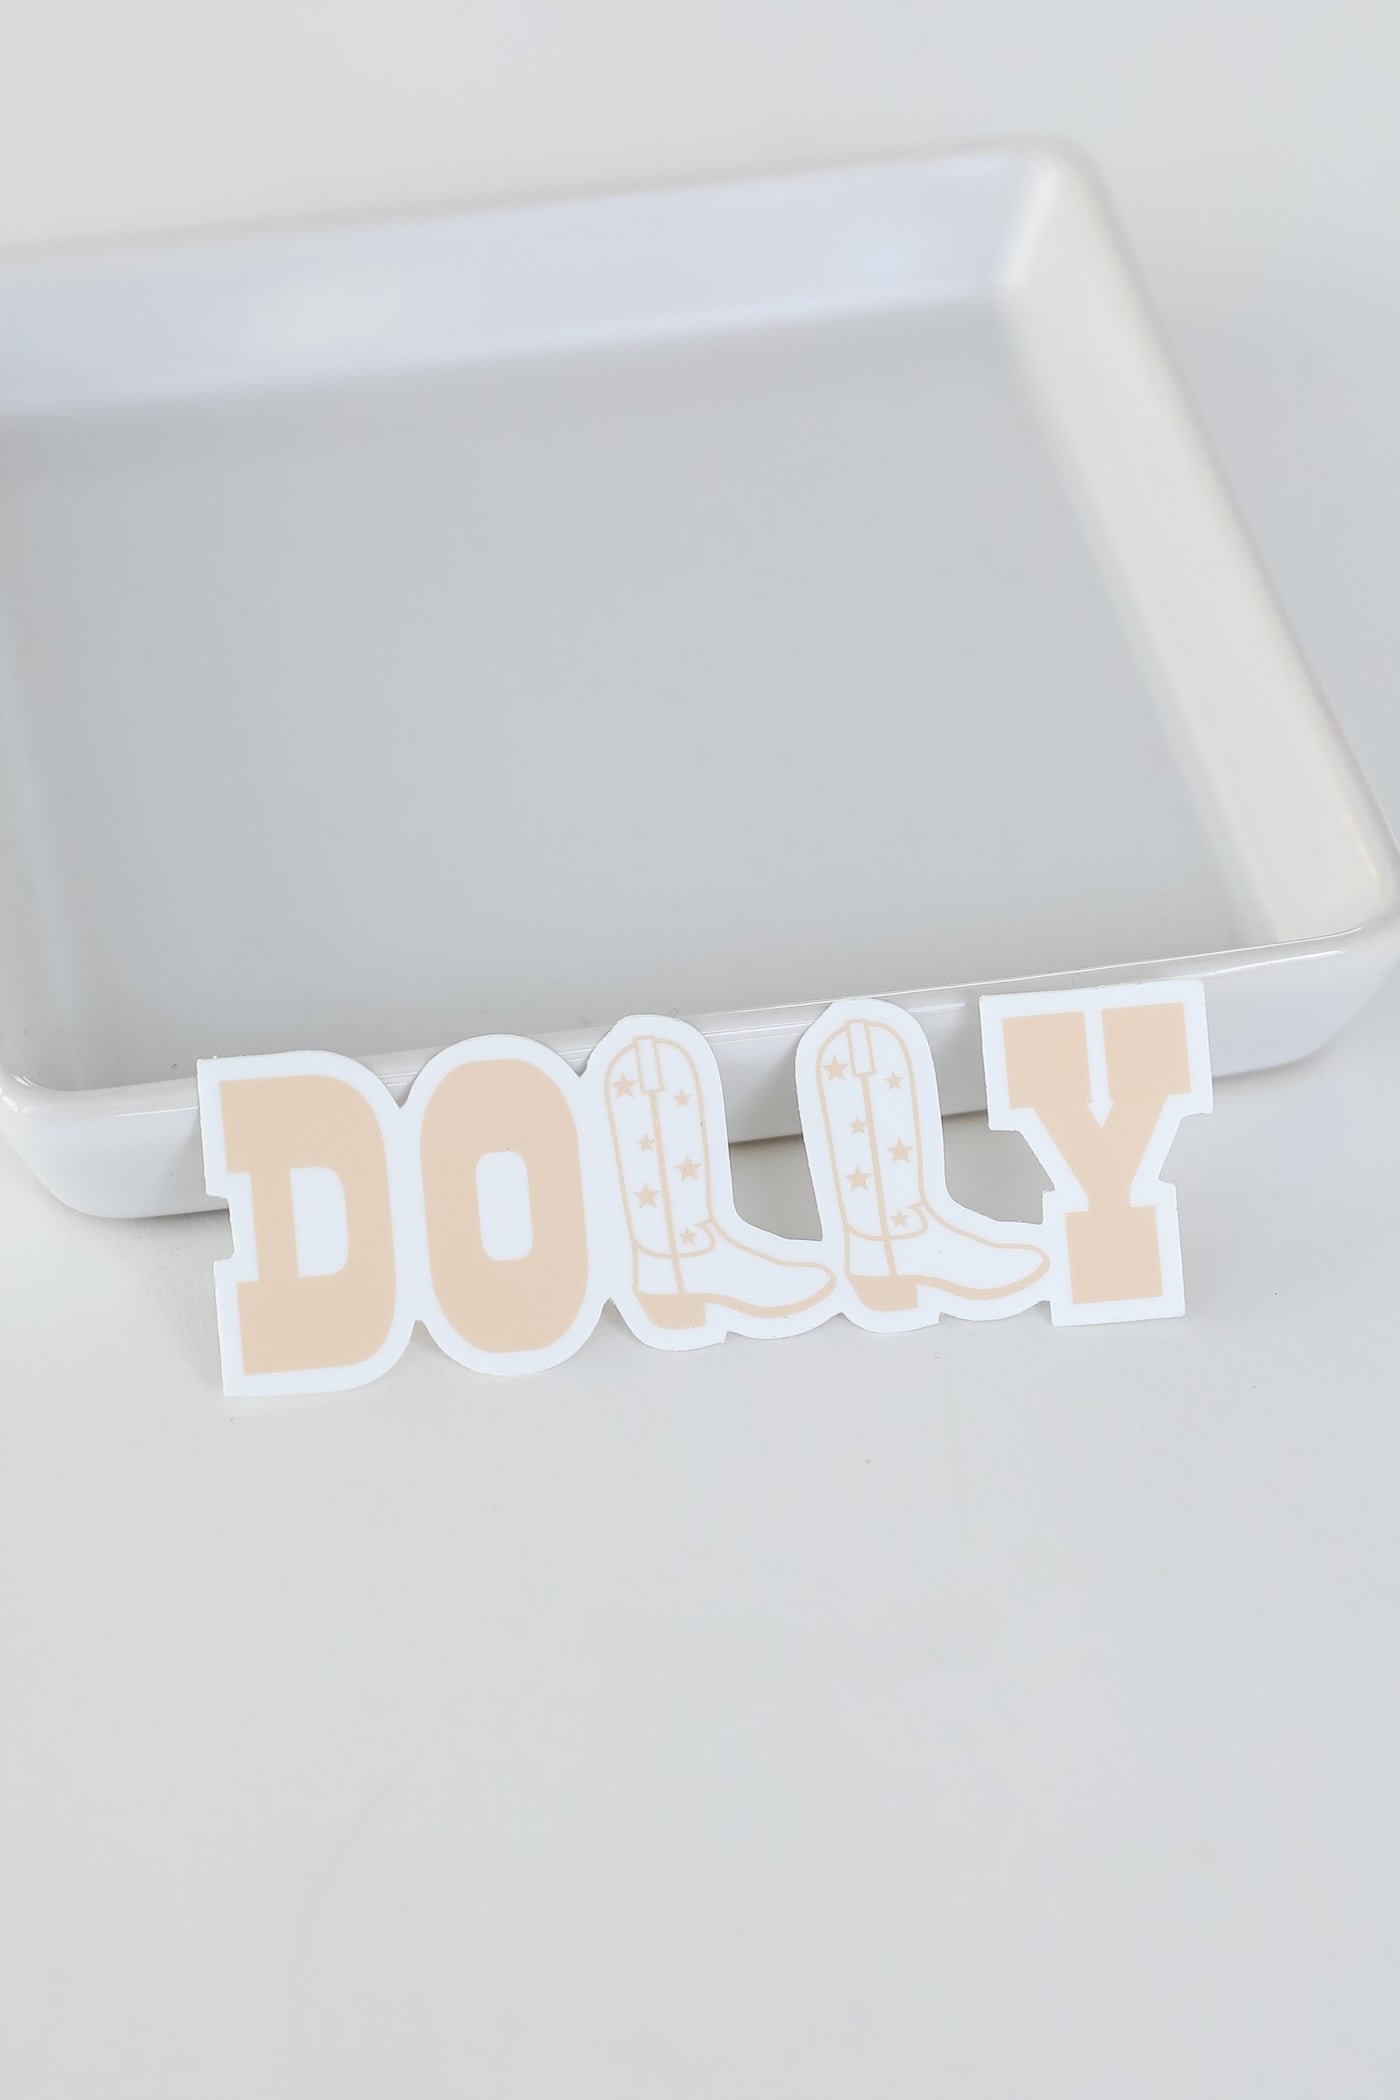 Dolly Boots Sticker in blush flat lay